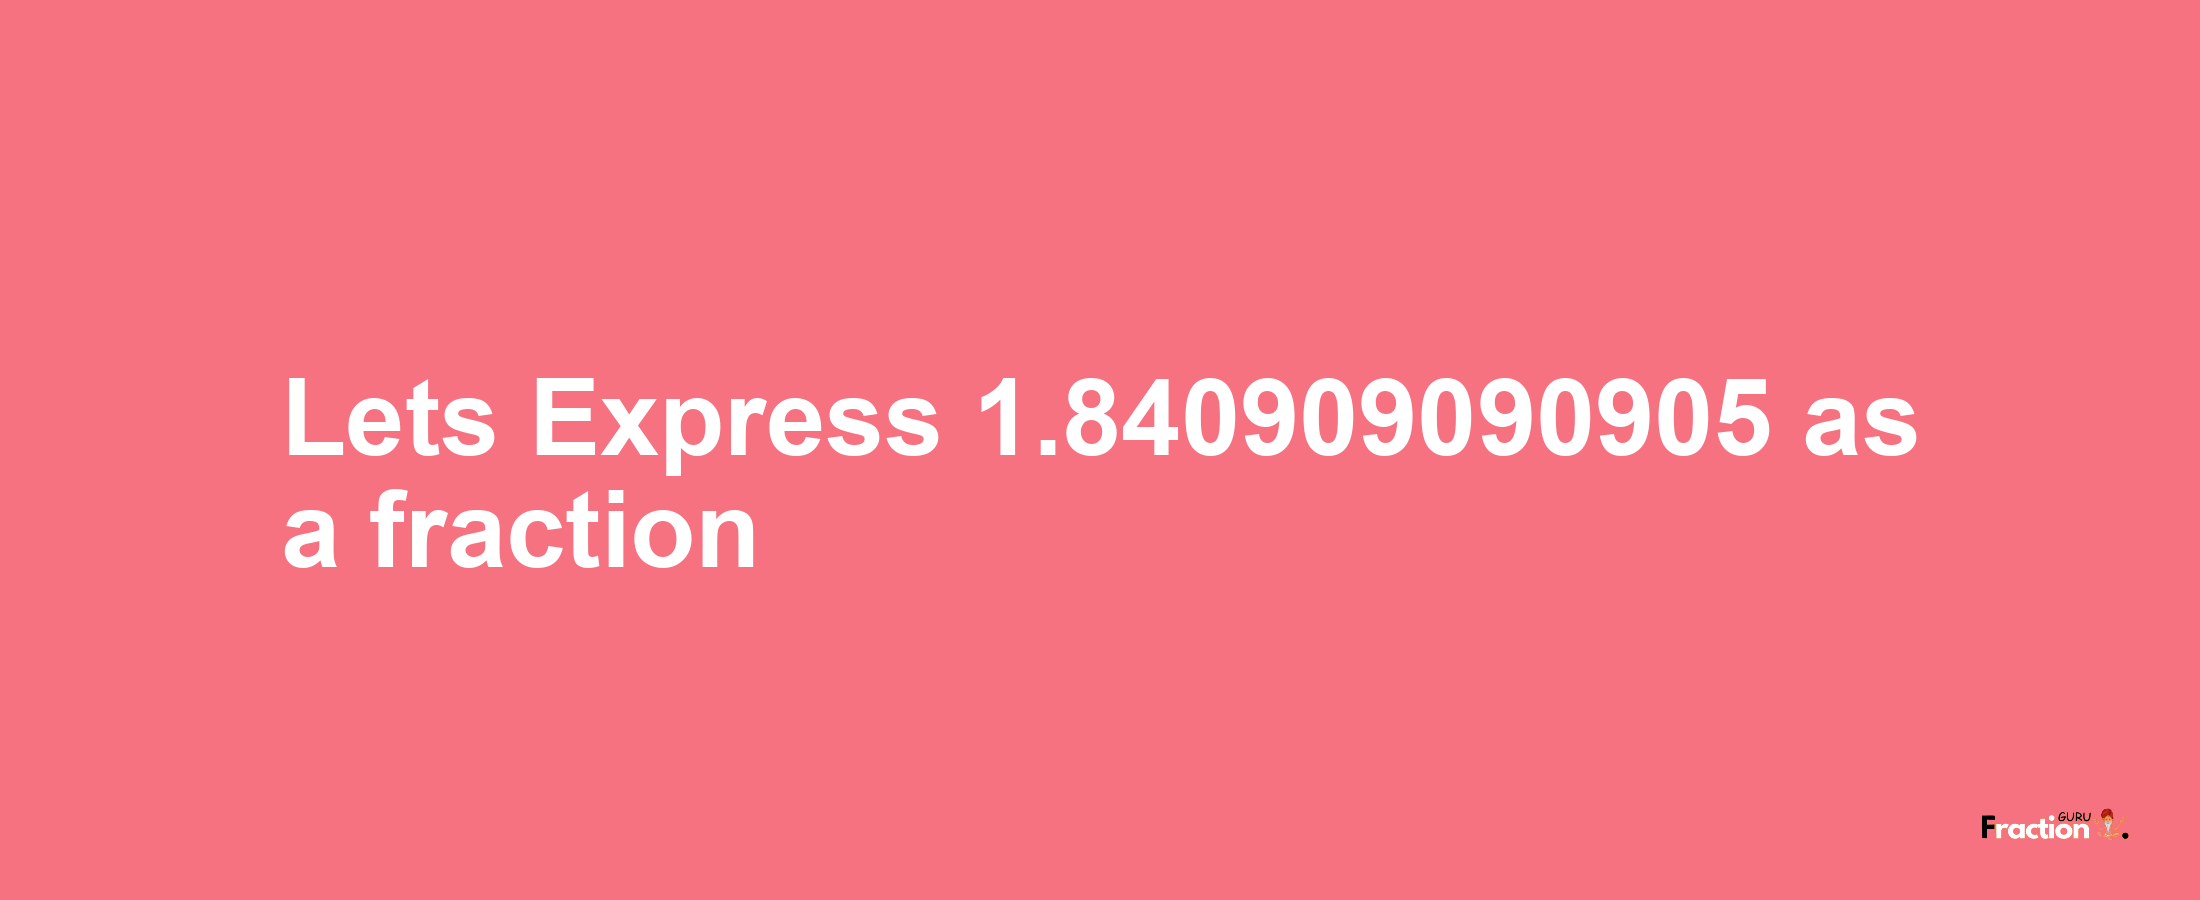 Lets Express 1.840909090905 as afraction